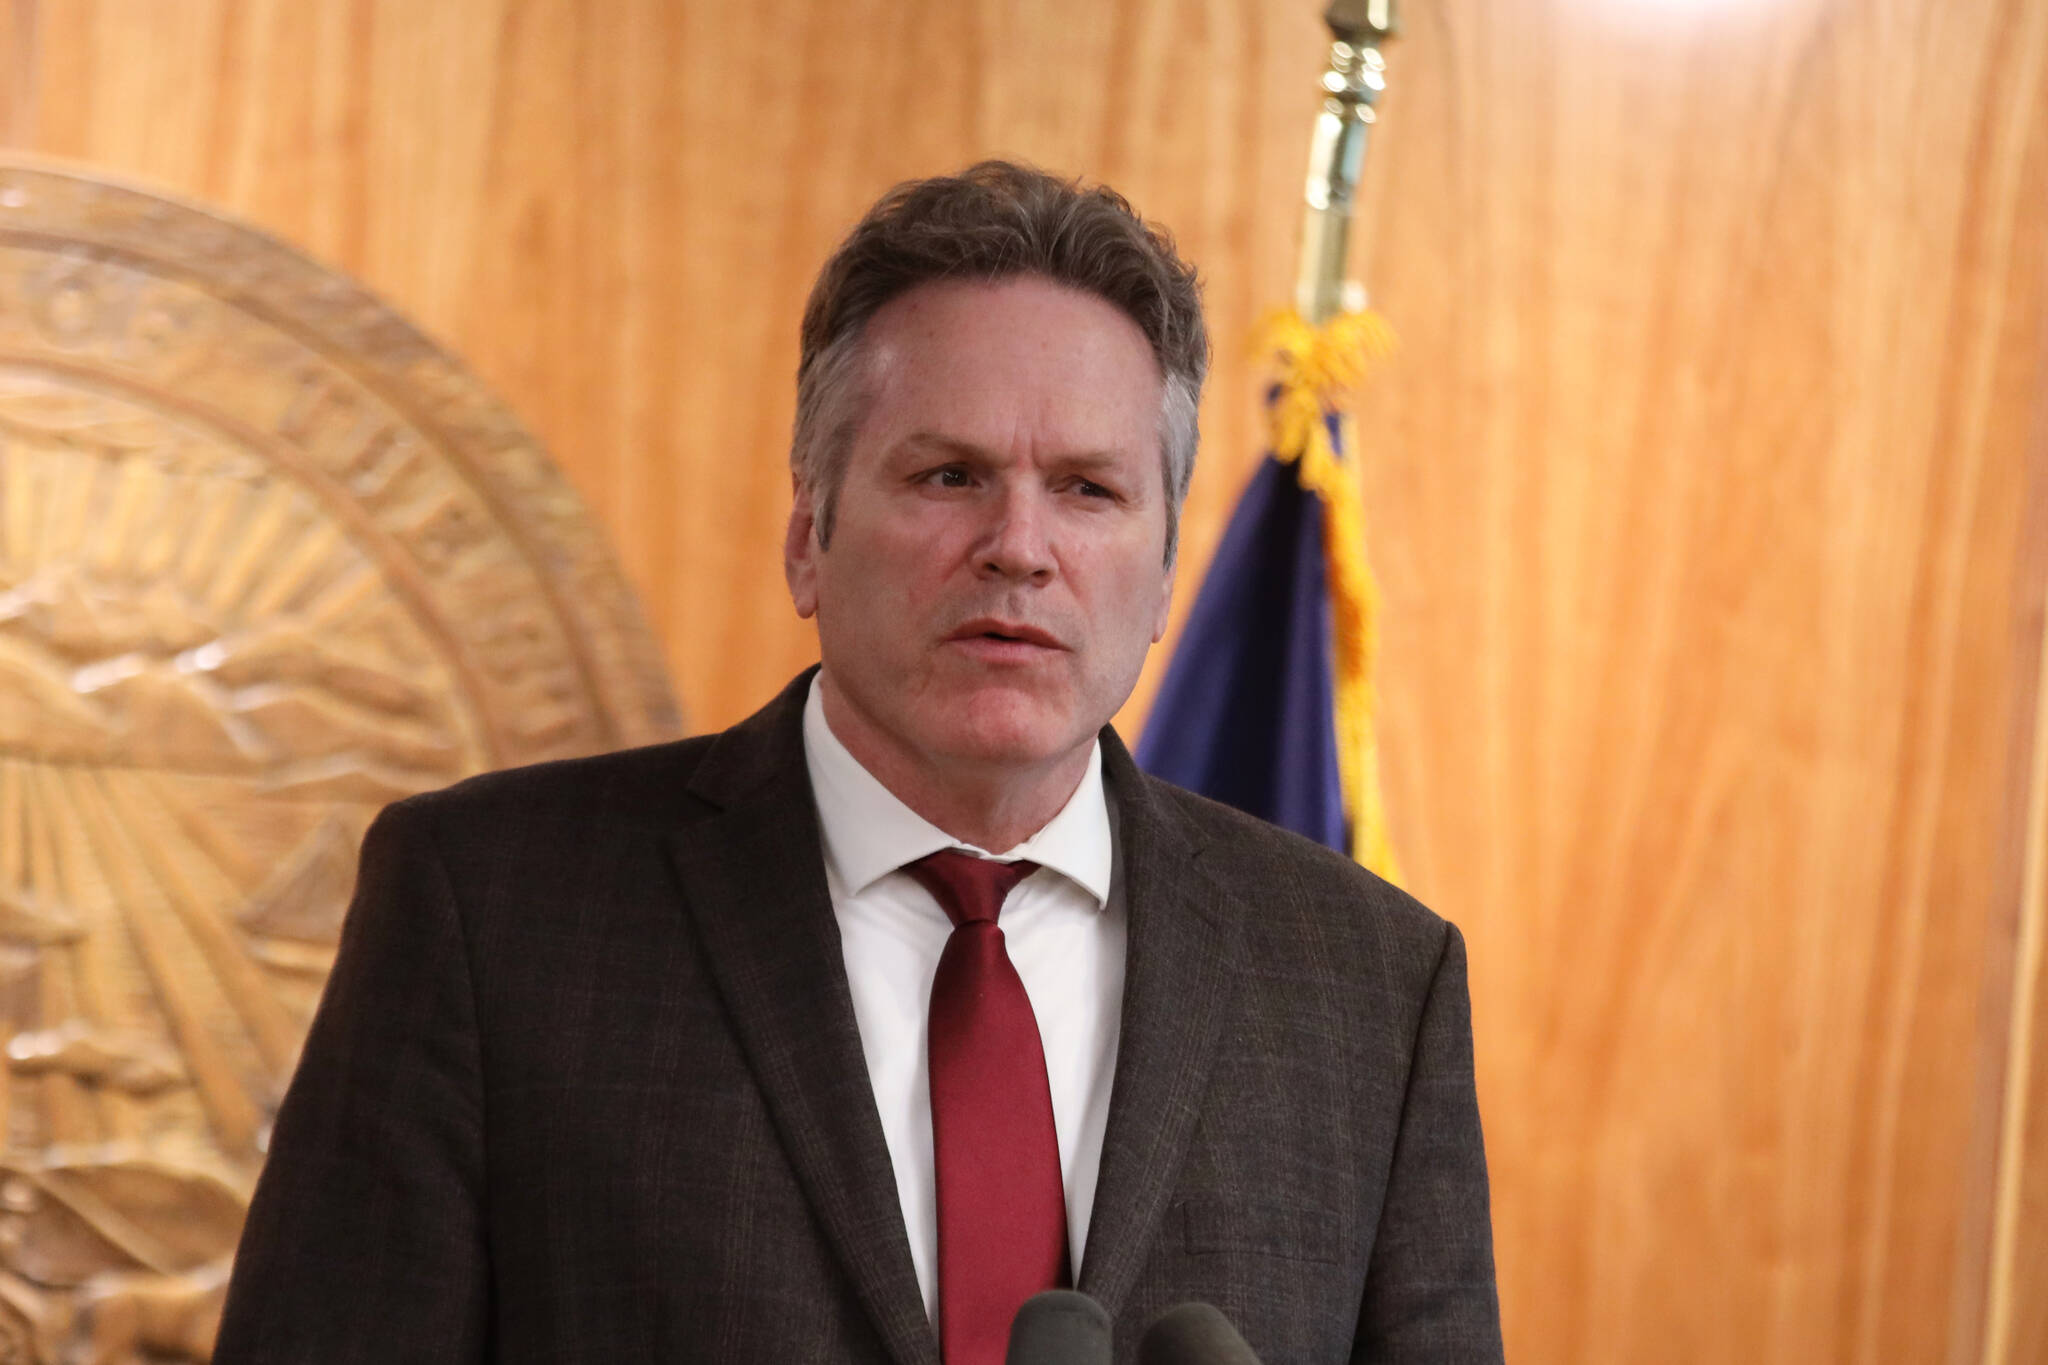 Gov. Mike Dunleavy speaks during a news conference in April focusing on the budget and a long-range fiscal plan for the state. He signed the budget for the fiscal year starting July 1 on Sunday, but did not publicly announce the signing or line-item vetoes made — including cutting in half an increase to public education spending — until Monday. (Clarise Larson / Juneau Empire File)